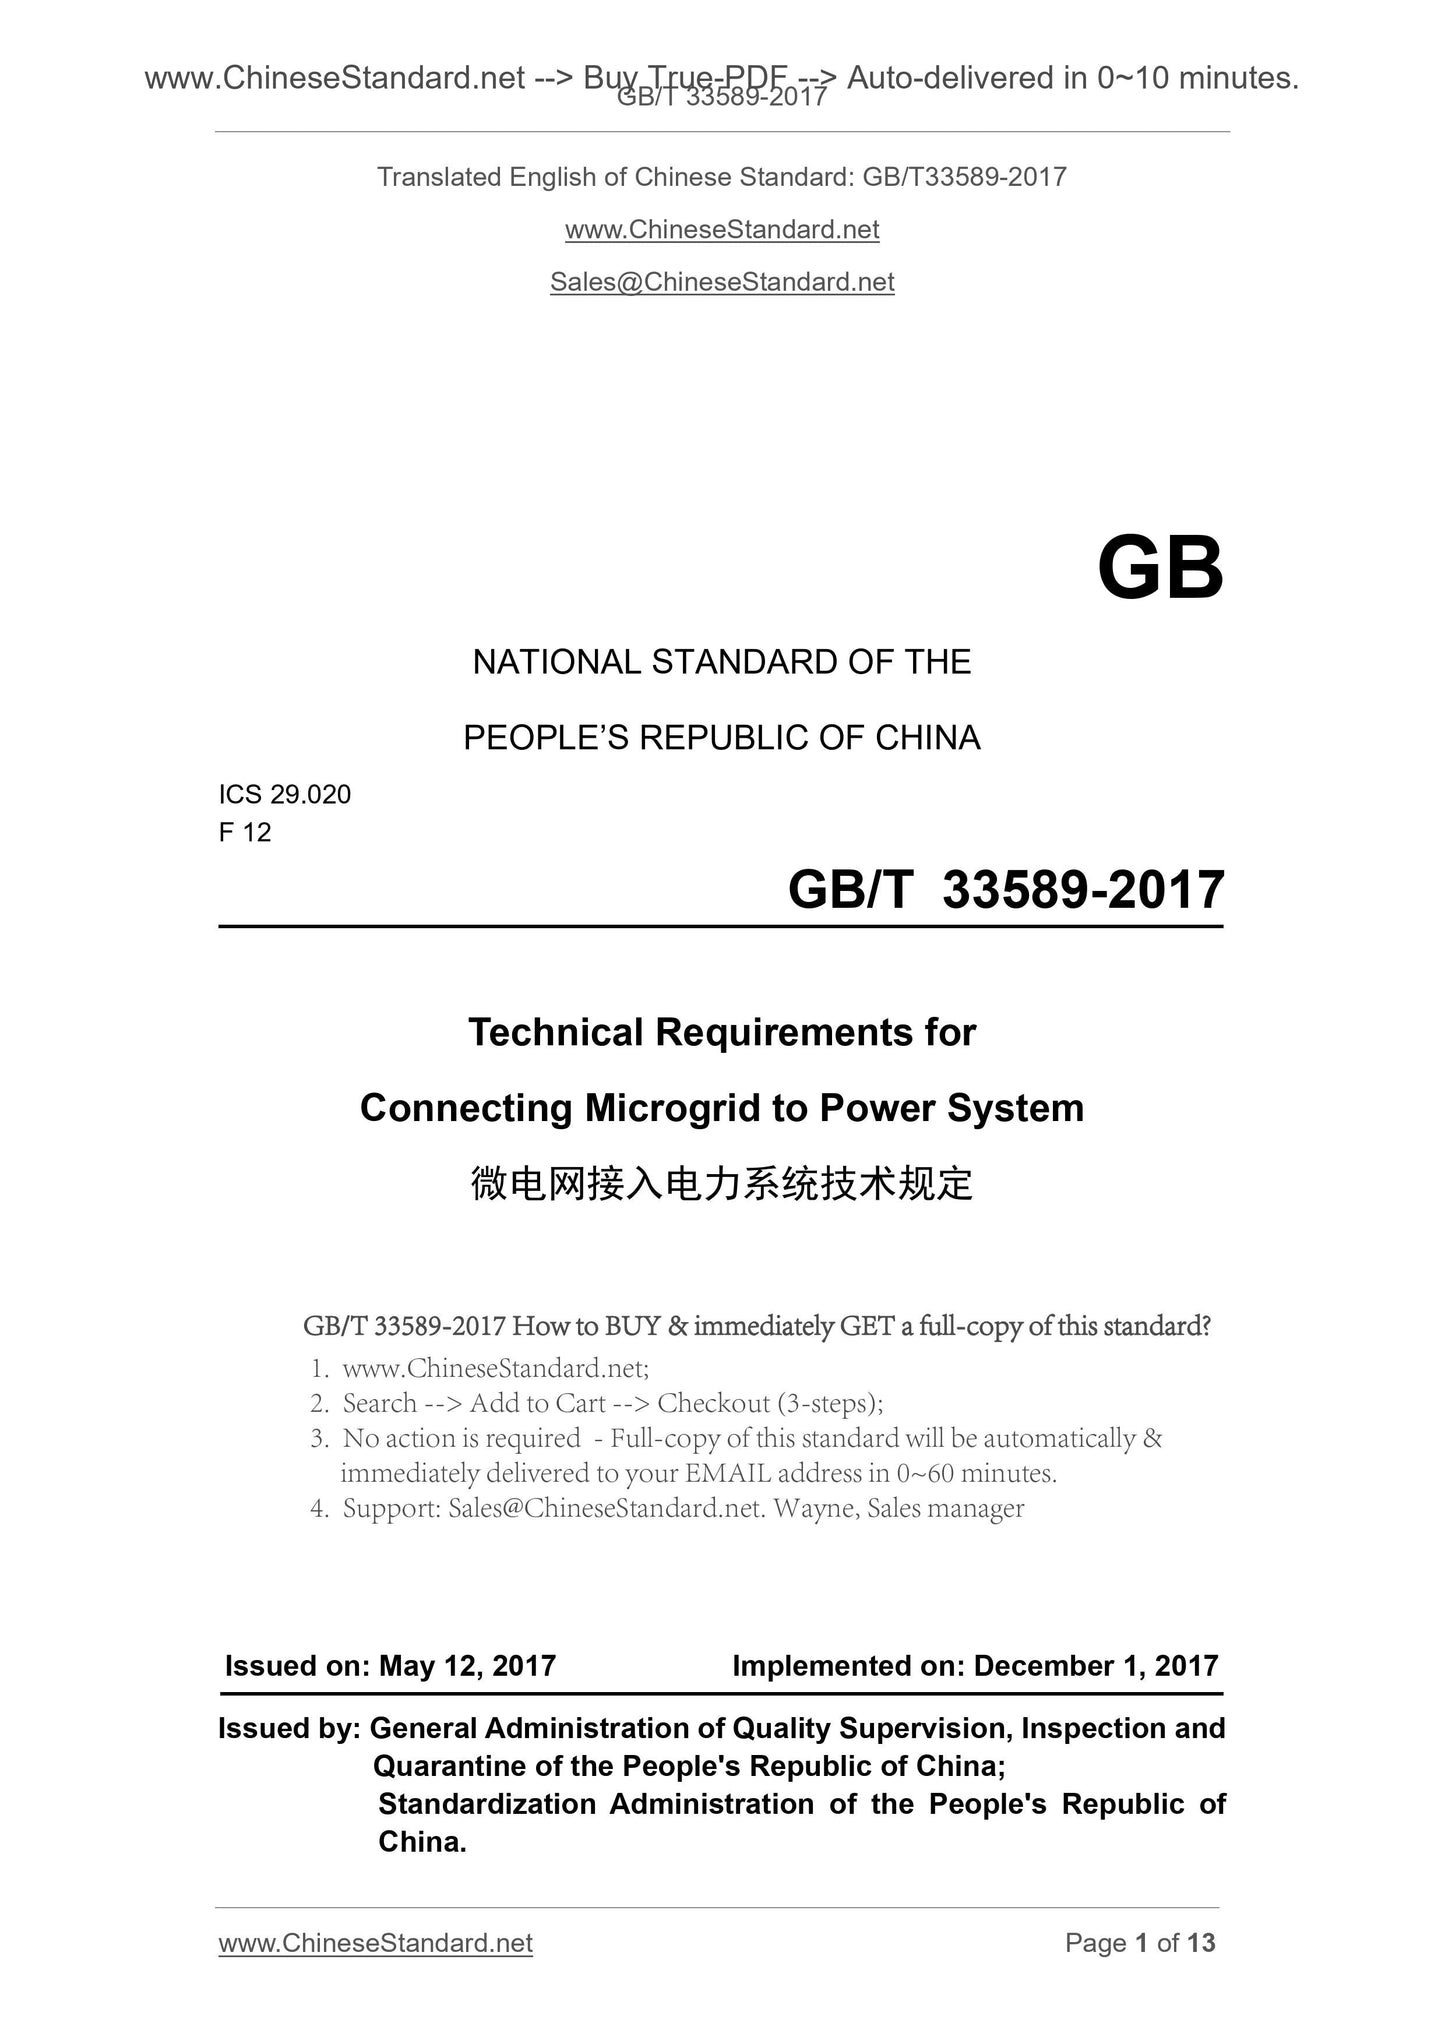 GB/T 33589-2017 Page 1